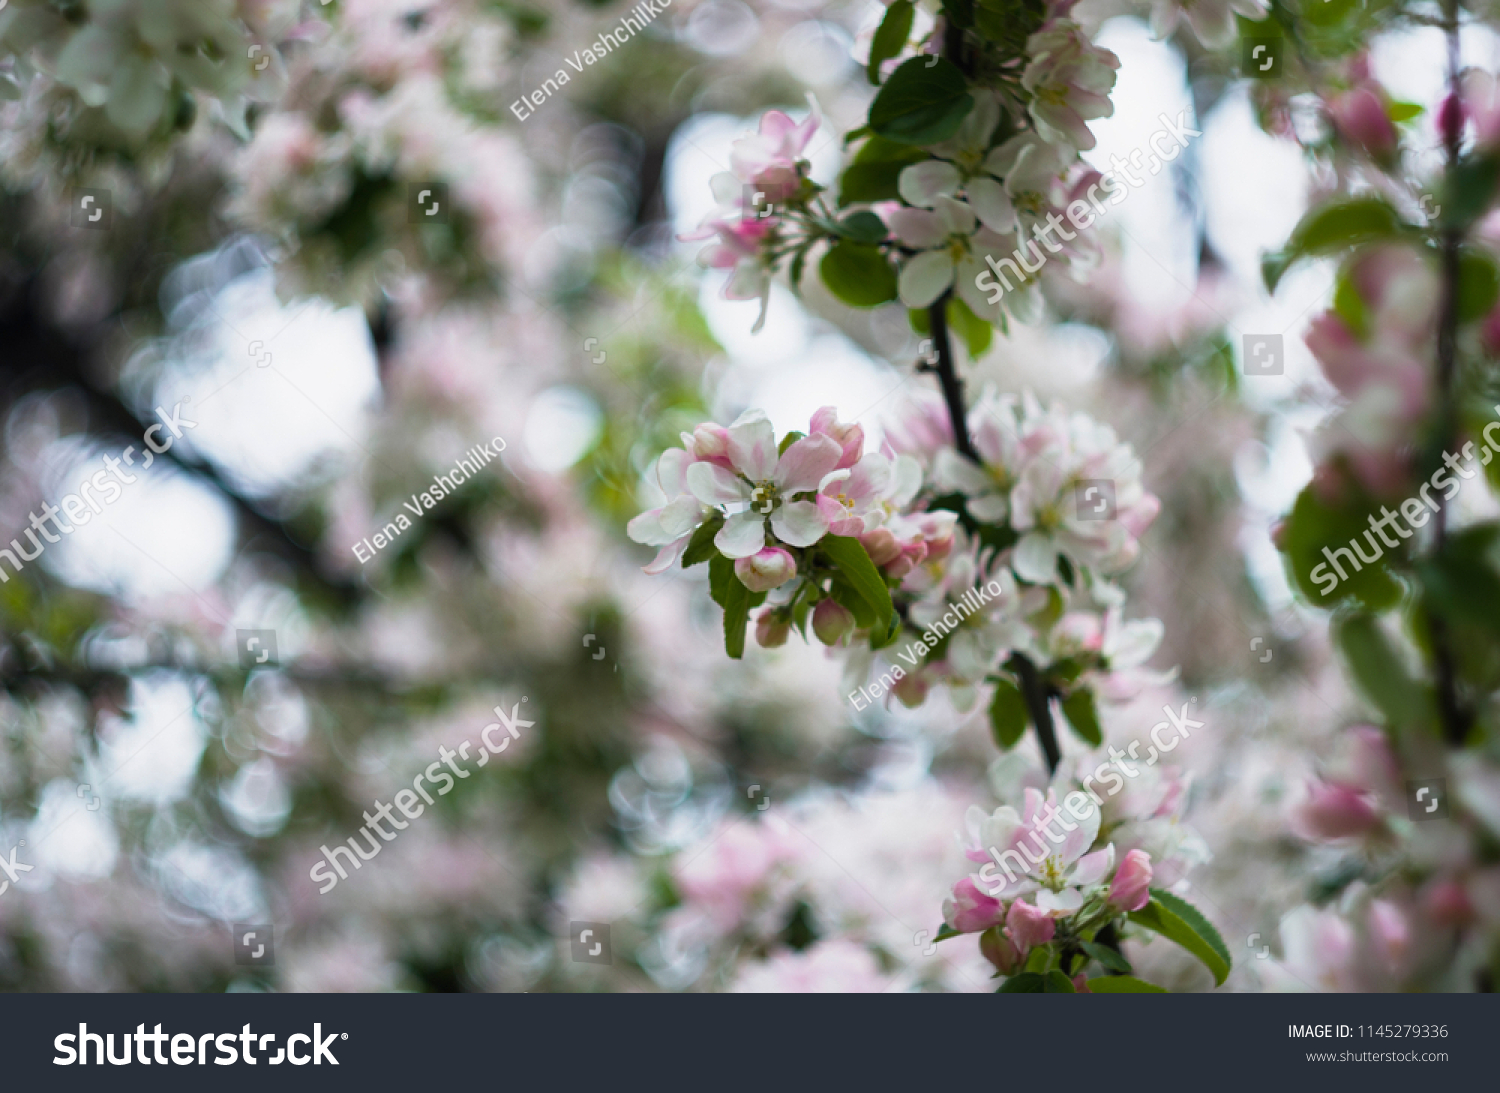 Flowers on the apple tree, pink colored, photoshoot with helios lens, flowerful bokeh, autumn garden, melancholy #1145279336